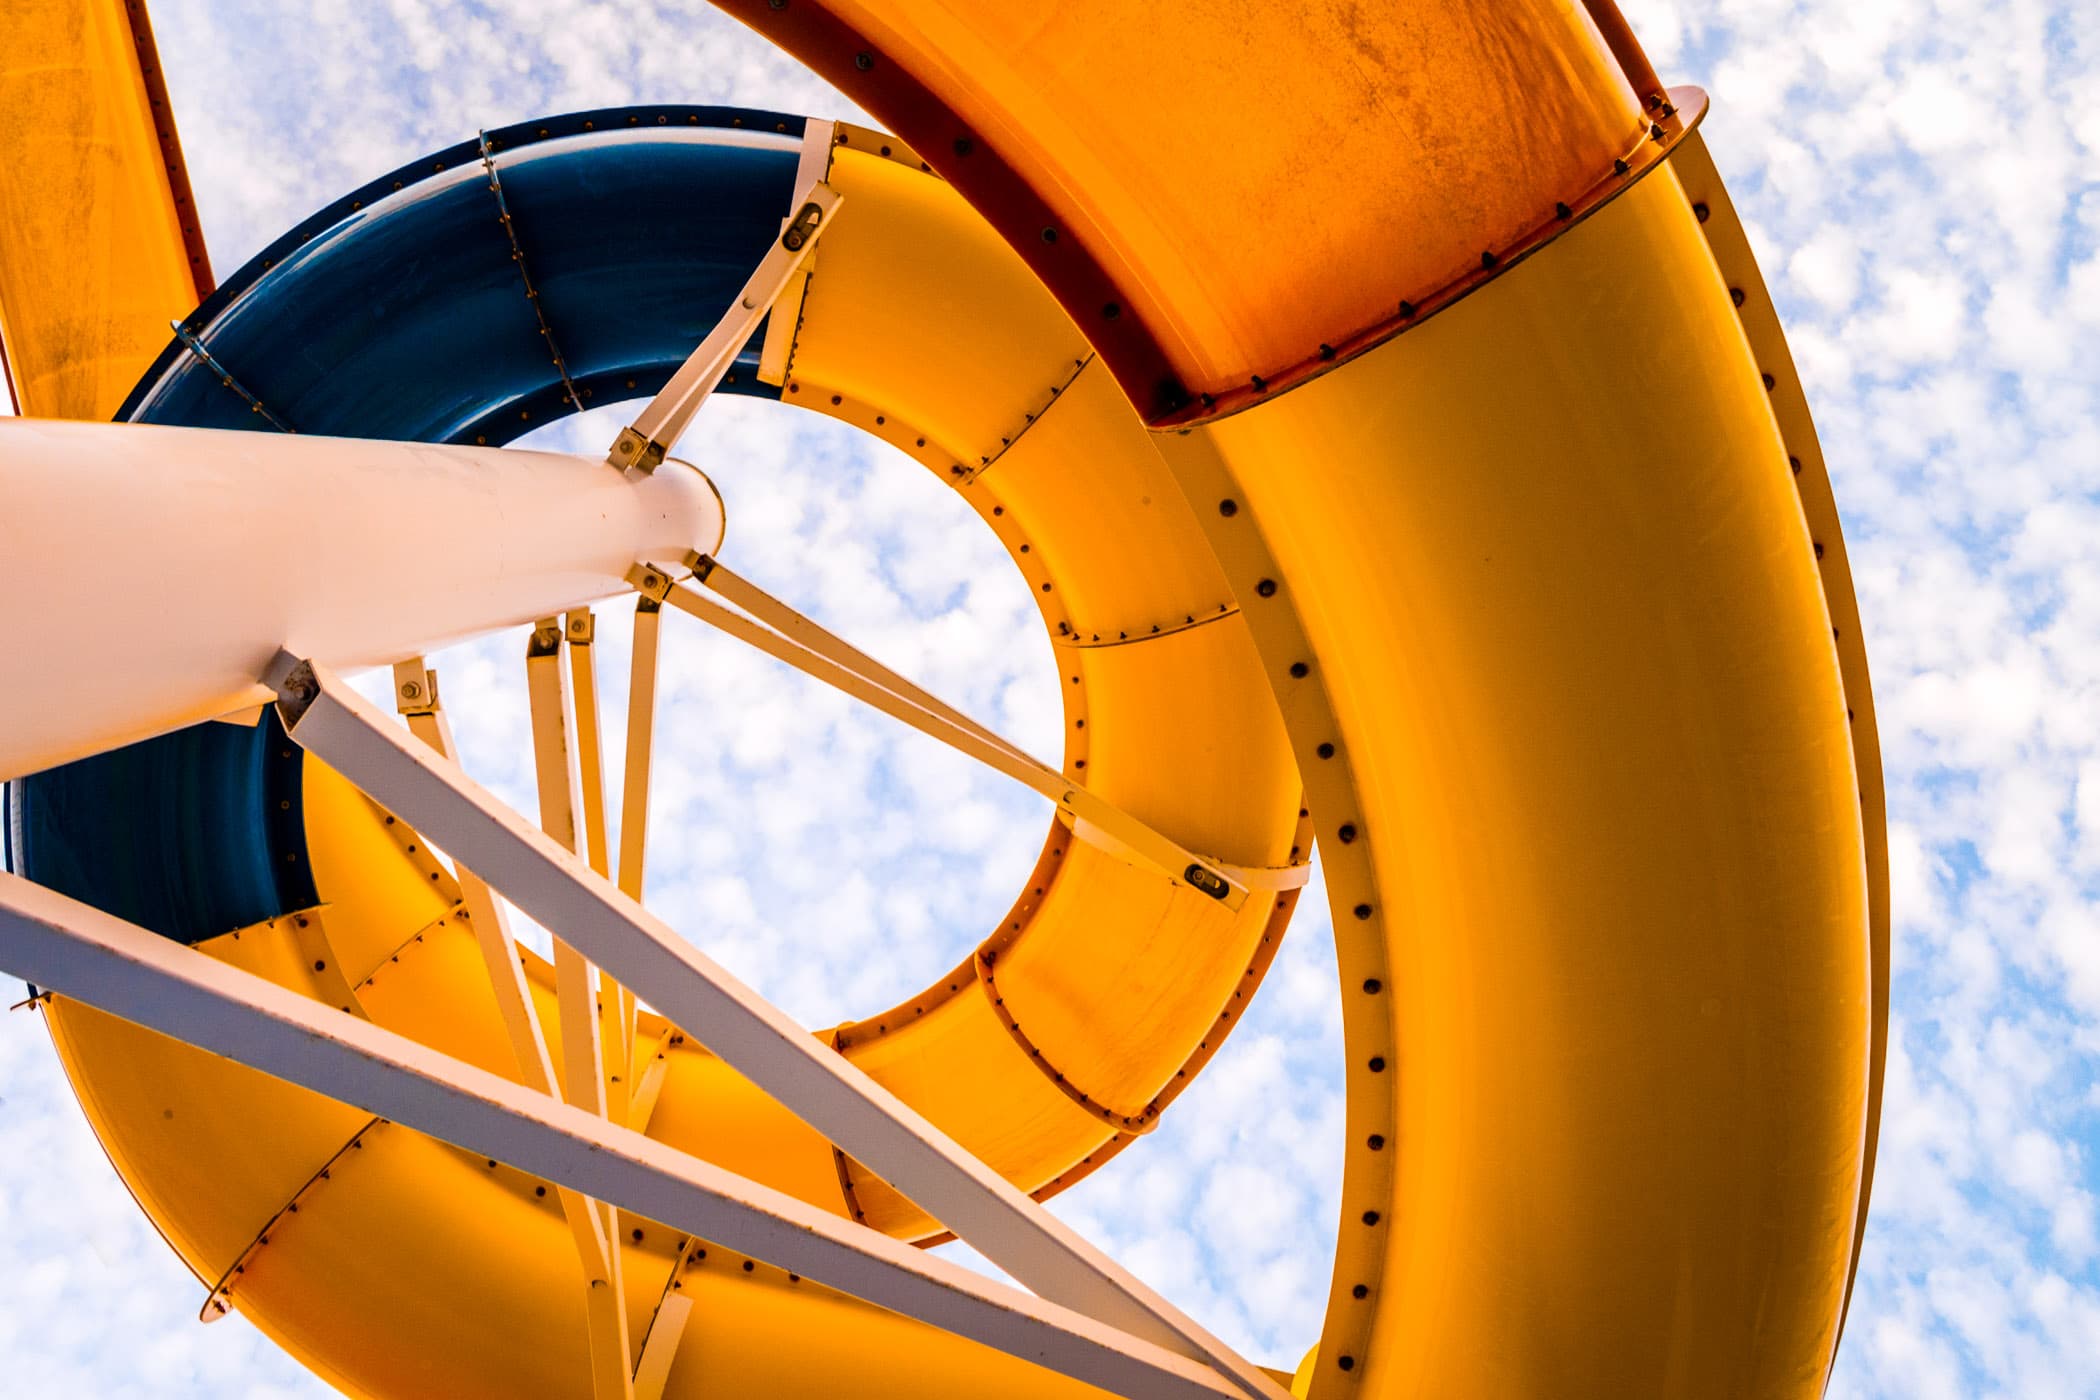 Abstract detail of one of the waterslides aboard the cruise ship Carnival Magic.